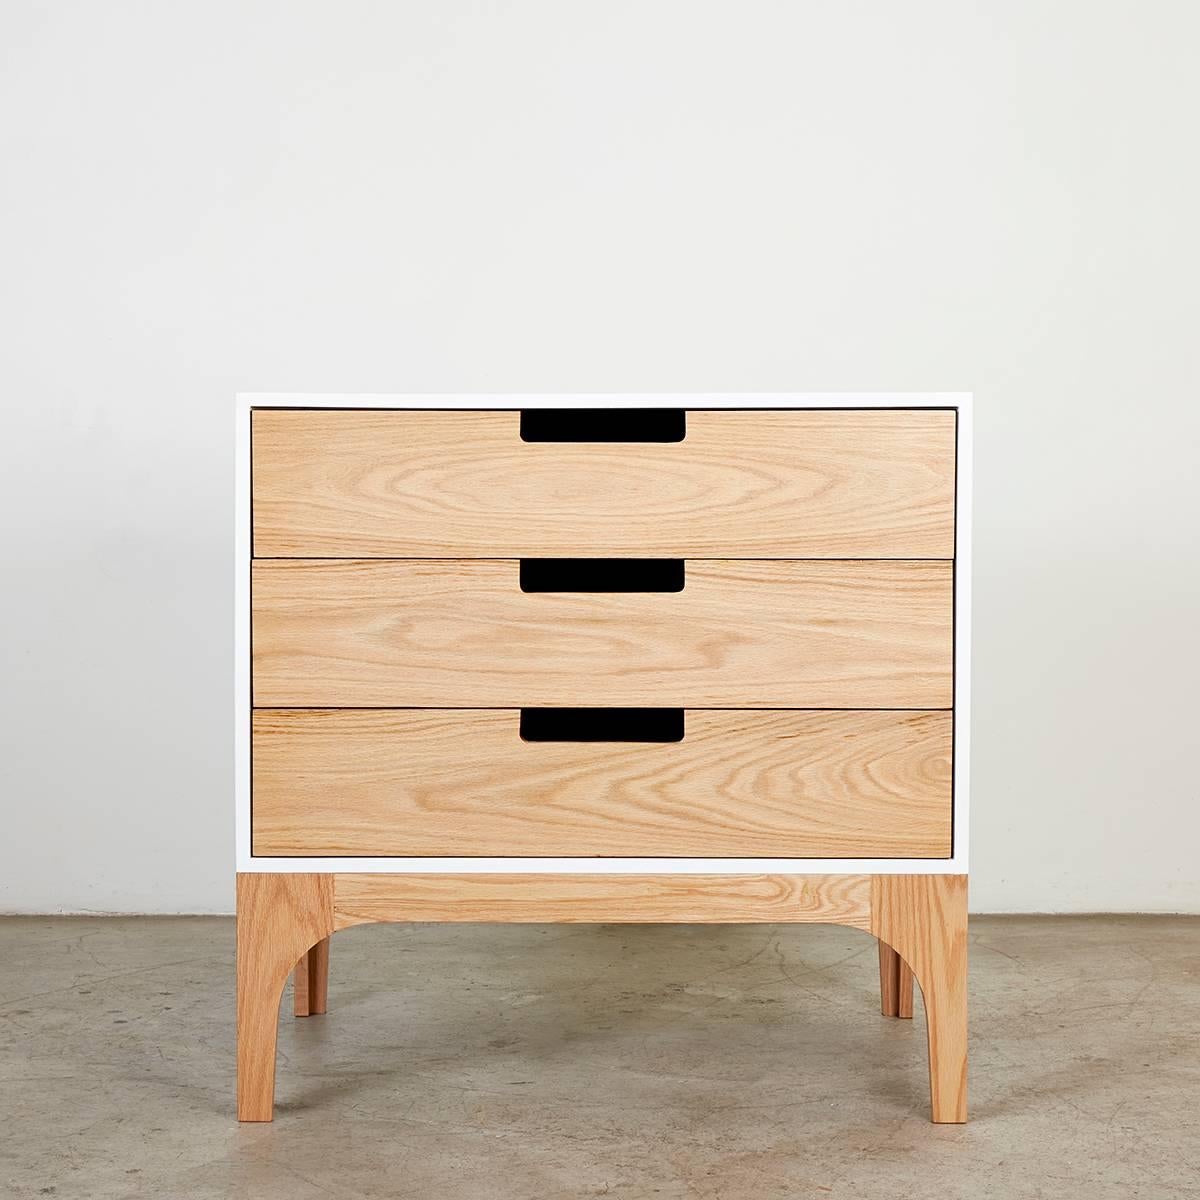 The Coco Chest  is a solid case piece with 3 generous drawers that feature heavy duty full extension soft close blum runners and dovetail joints. Designed by Irish / South African brand Bunny & Clyde in 2013, the Harrison Chest of Drawers is hand